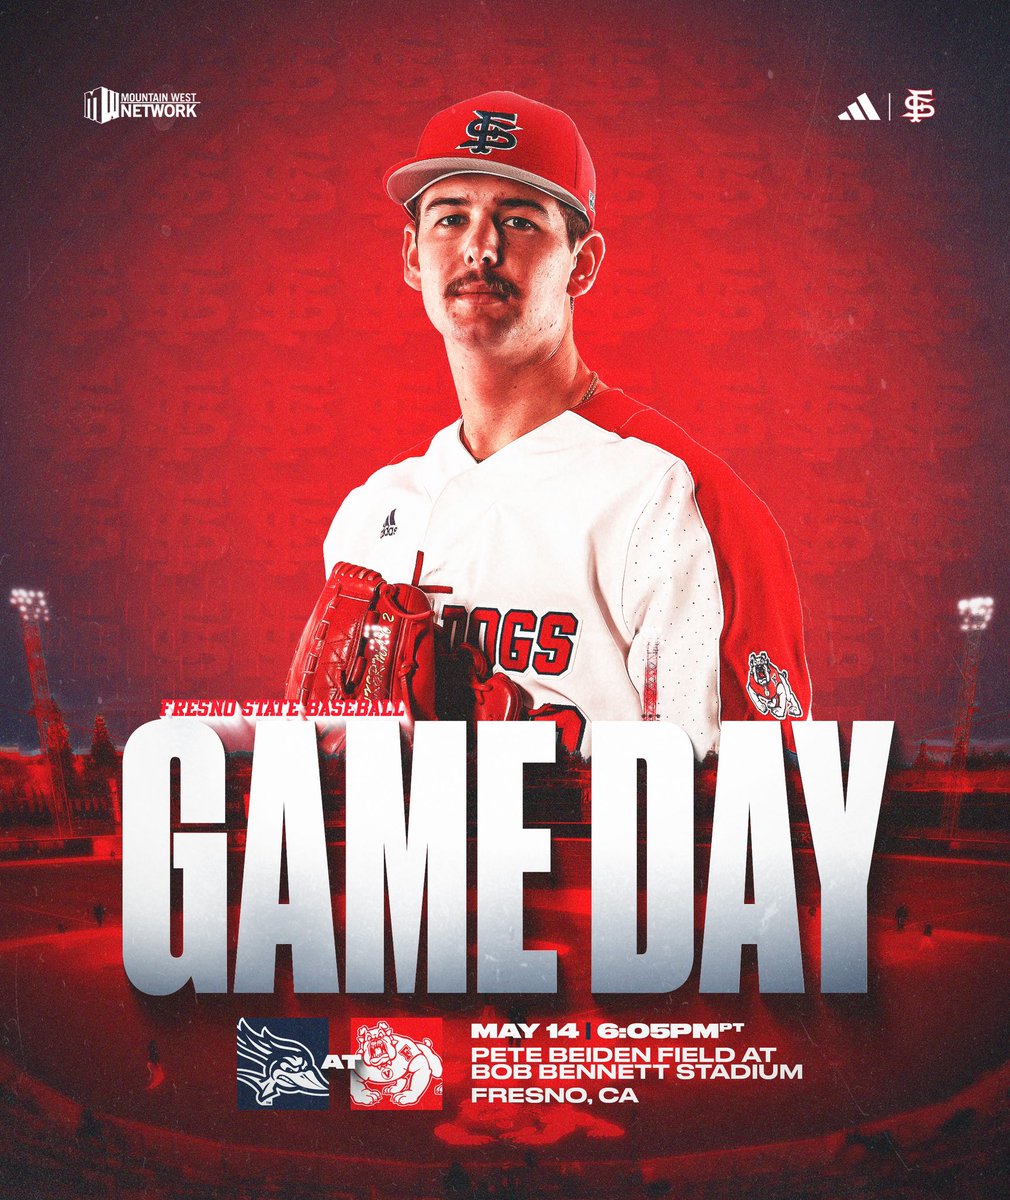 One last ride at home 🤠 ⚾️ 6:05 pm 🔗linktr.ee/fresnostatebsb